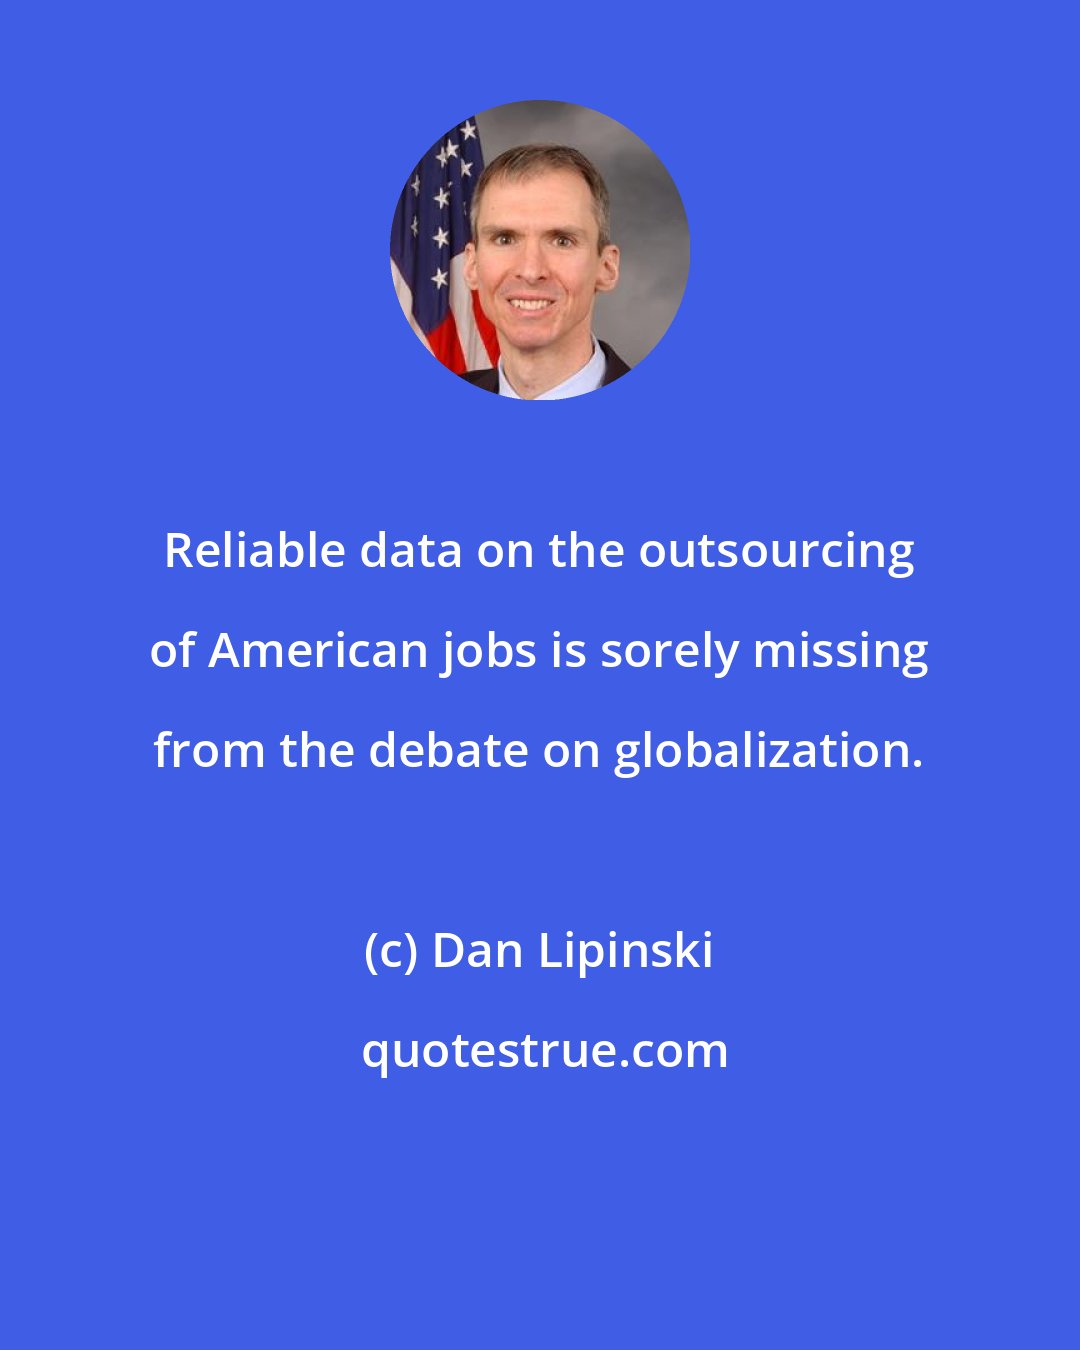 Dan Lipinski: Reliable data on the outsourcing of American jobs is sorely missing from the debate on globalization.